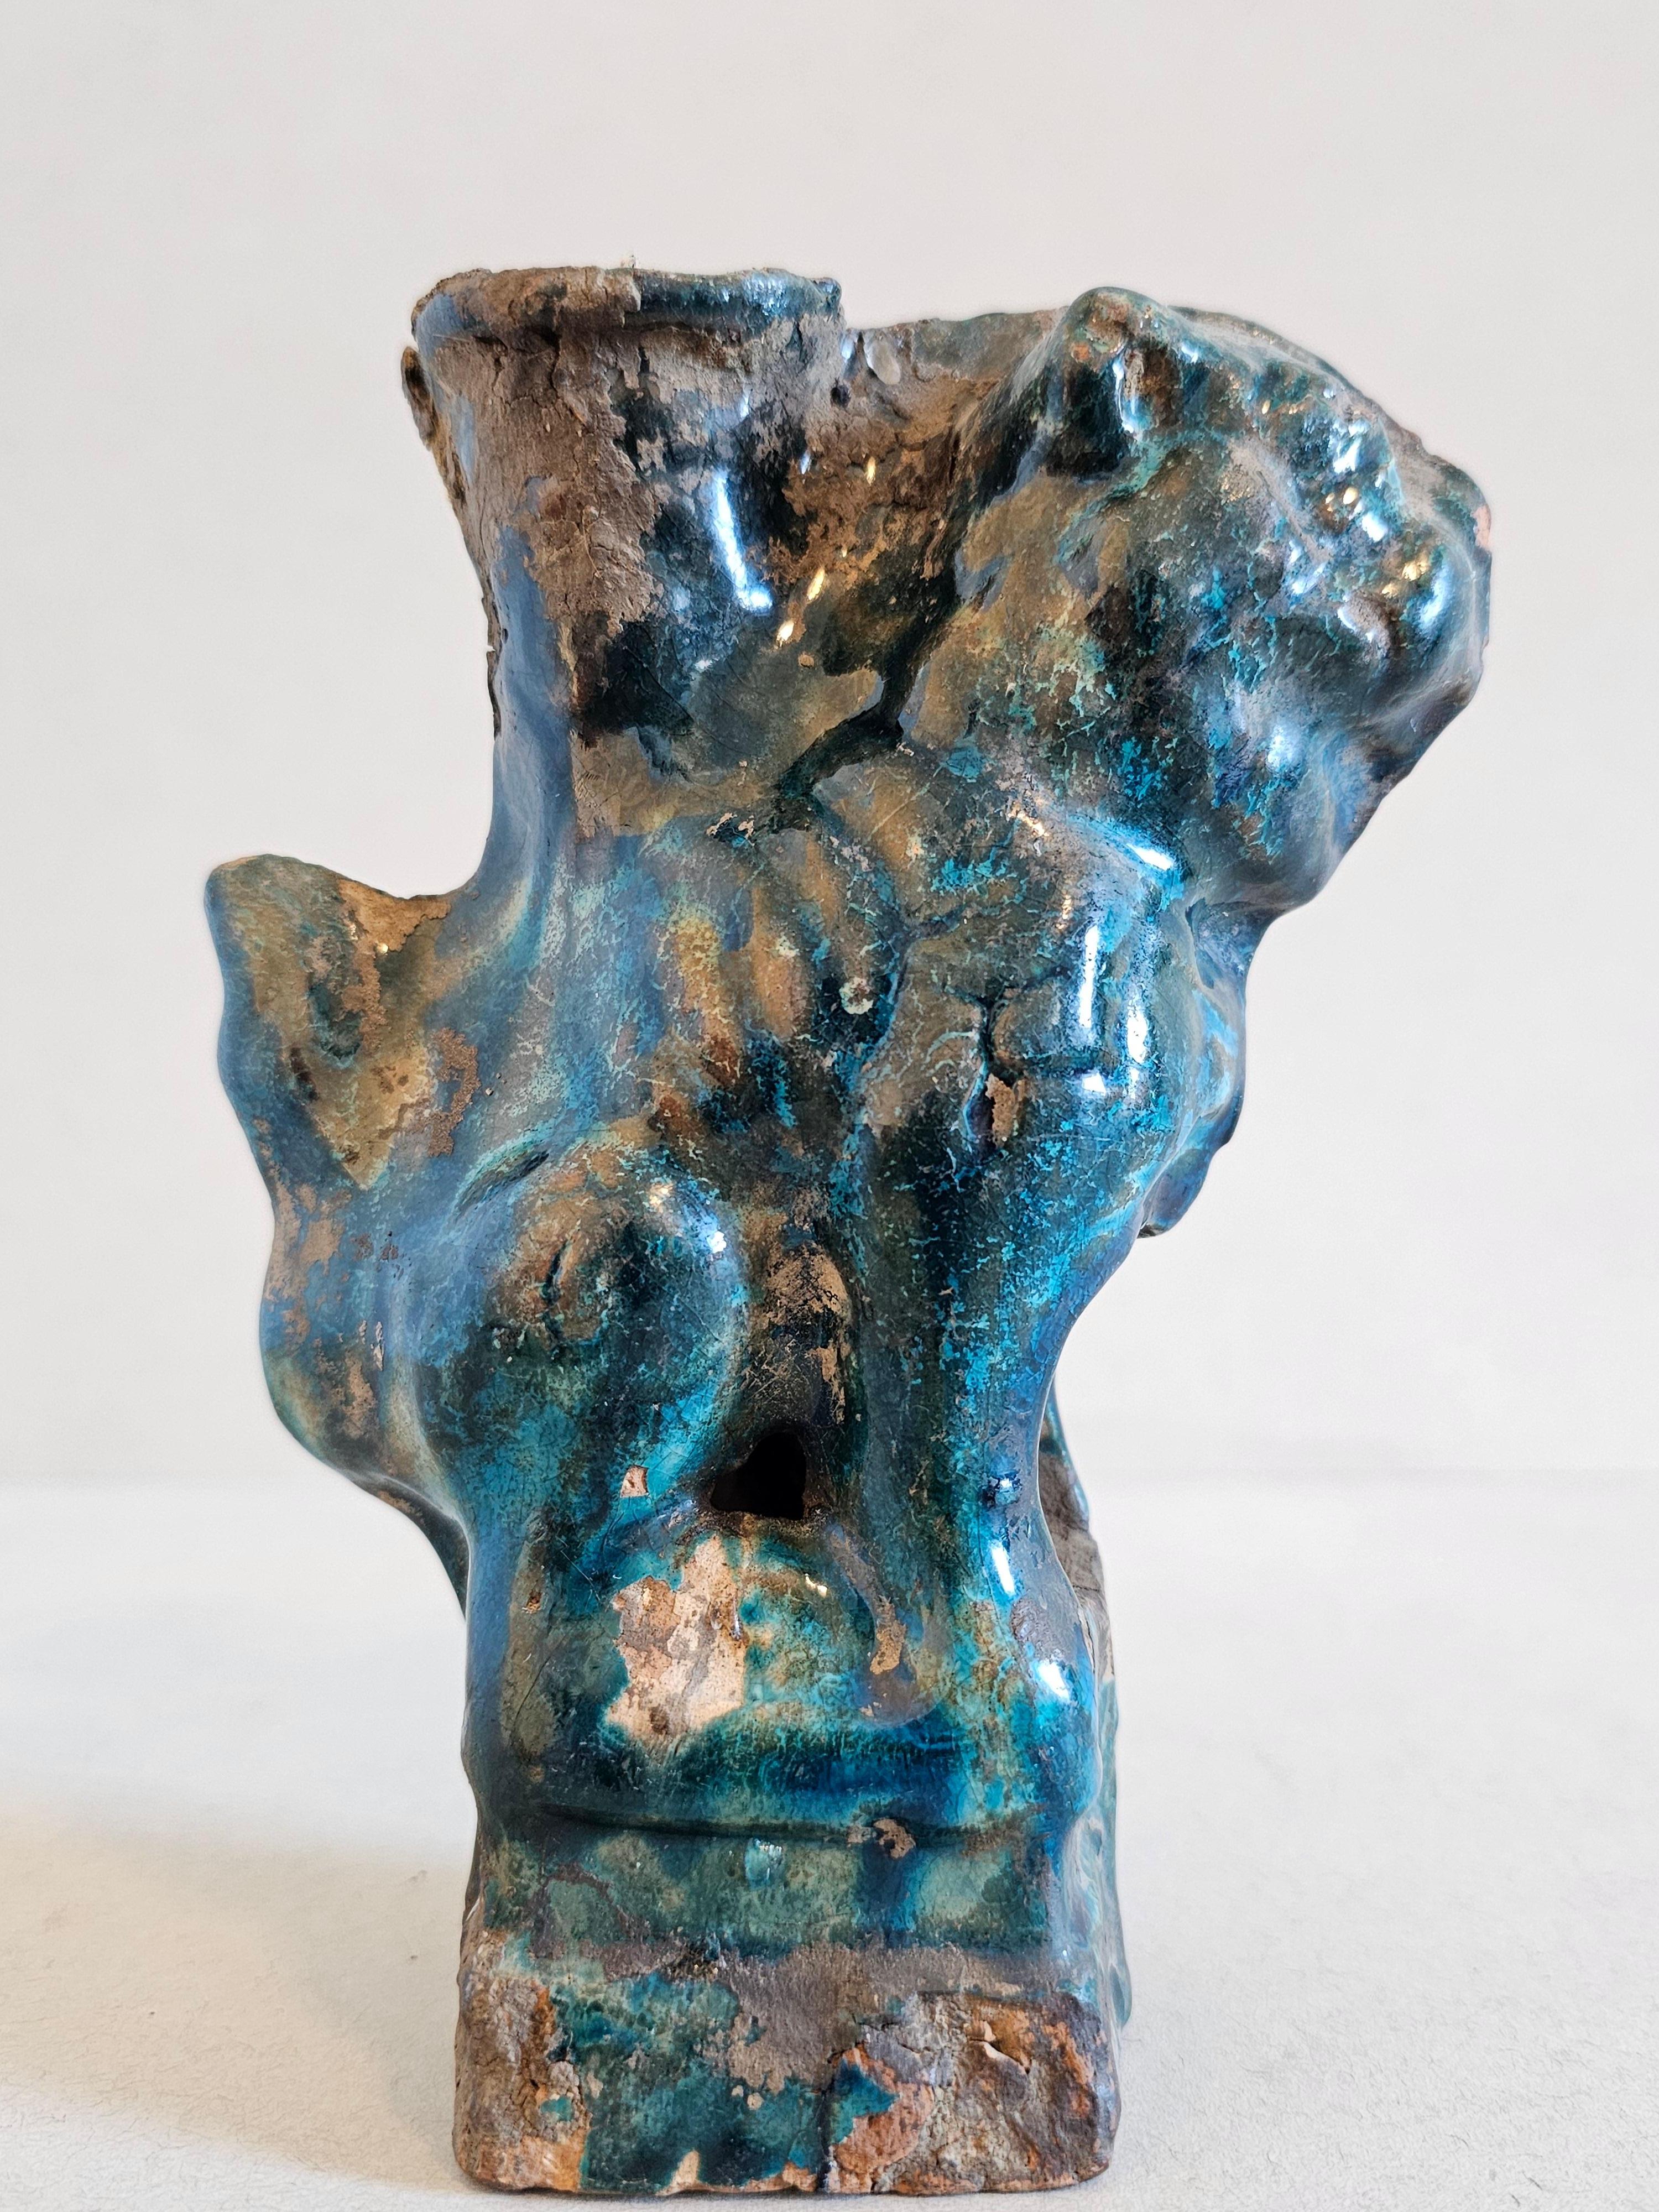 A rare and remarkable original Song (Sung) Dynasty (960 to 1279) dark turquoise blue glazed earthenware pottery joss stick incense holder. Likely Jun ware, Northern Song Dynasty (960 to 1127)

Hand-crafted in China over 1000 years ago, the Song